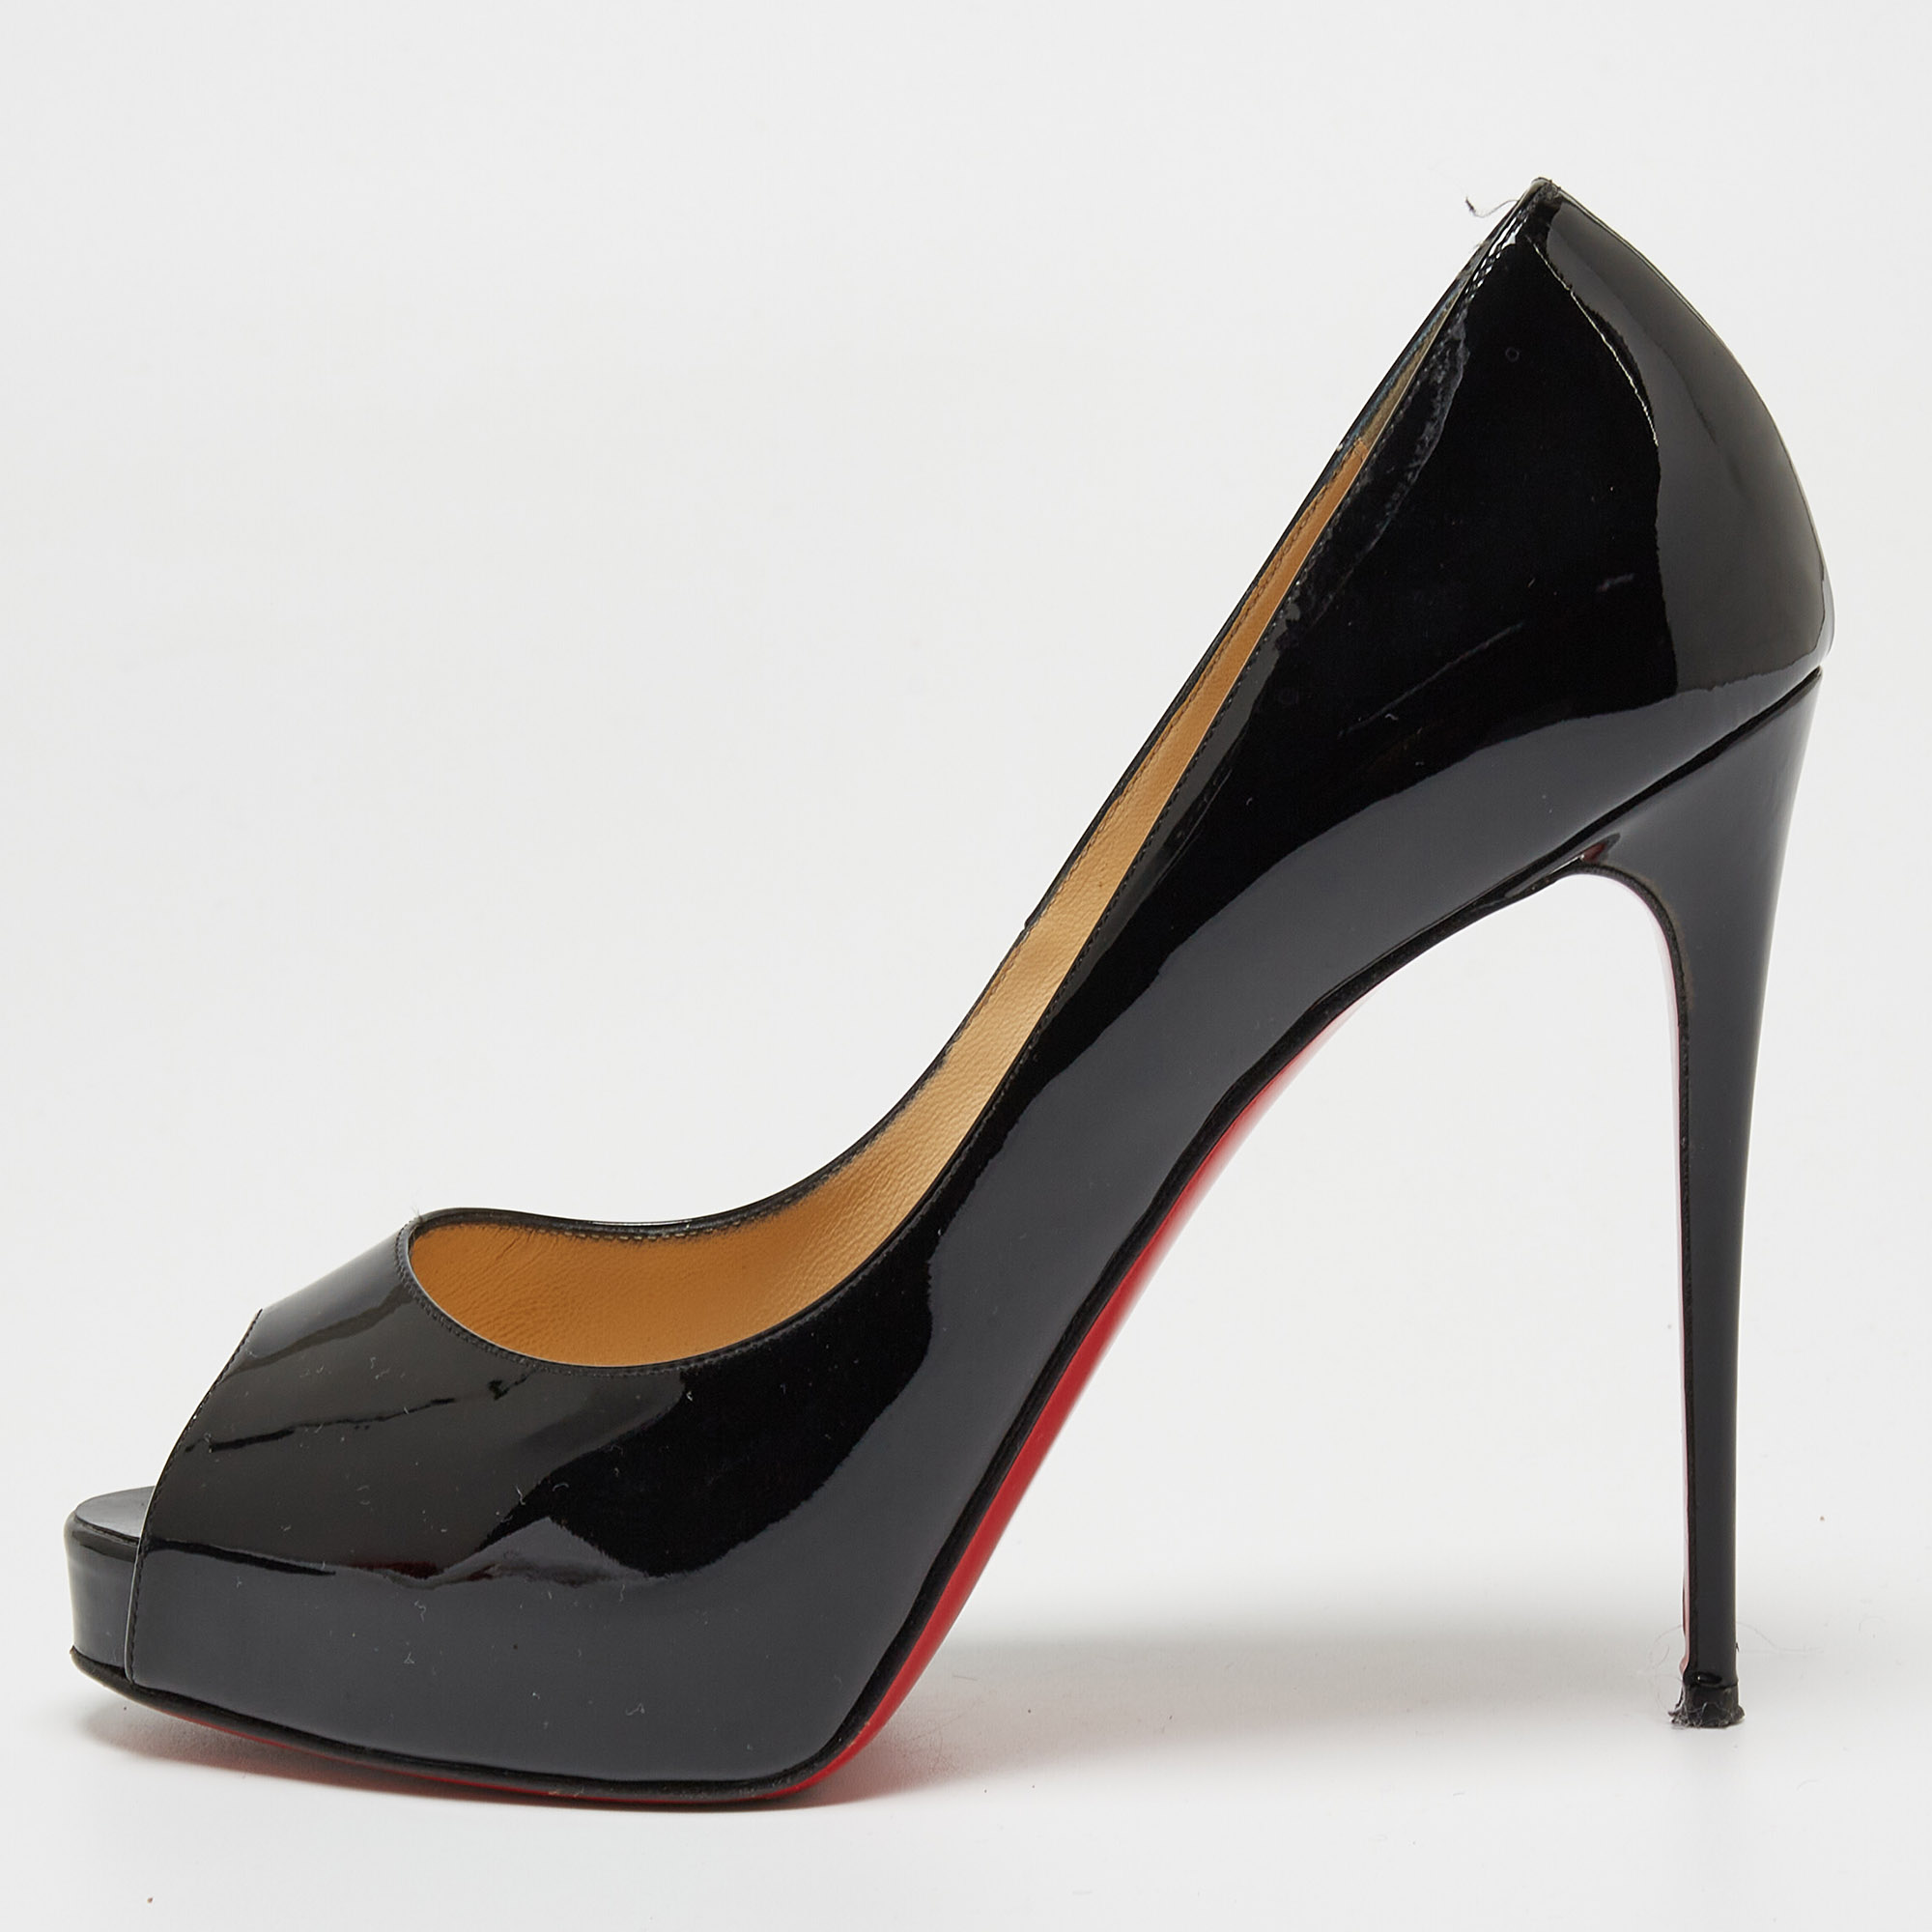 Christian Louboutin Black Patent Leather New Prive Pumps Size 38.5